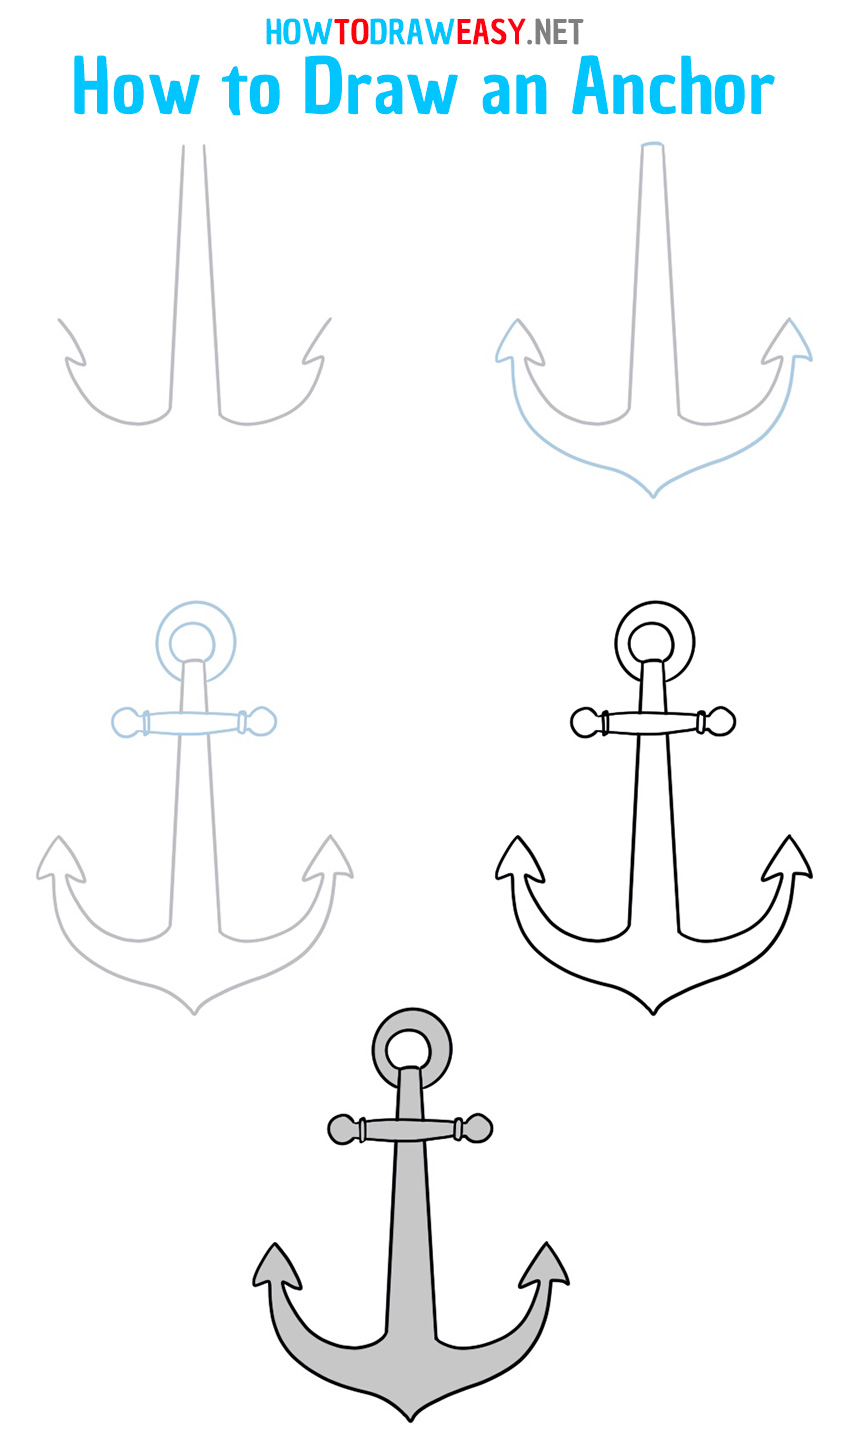 How to Draw an Anchor Step by Step